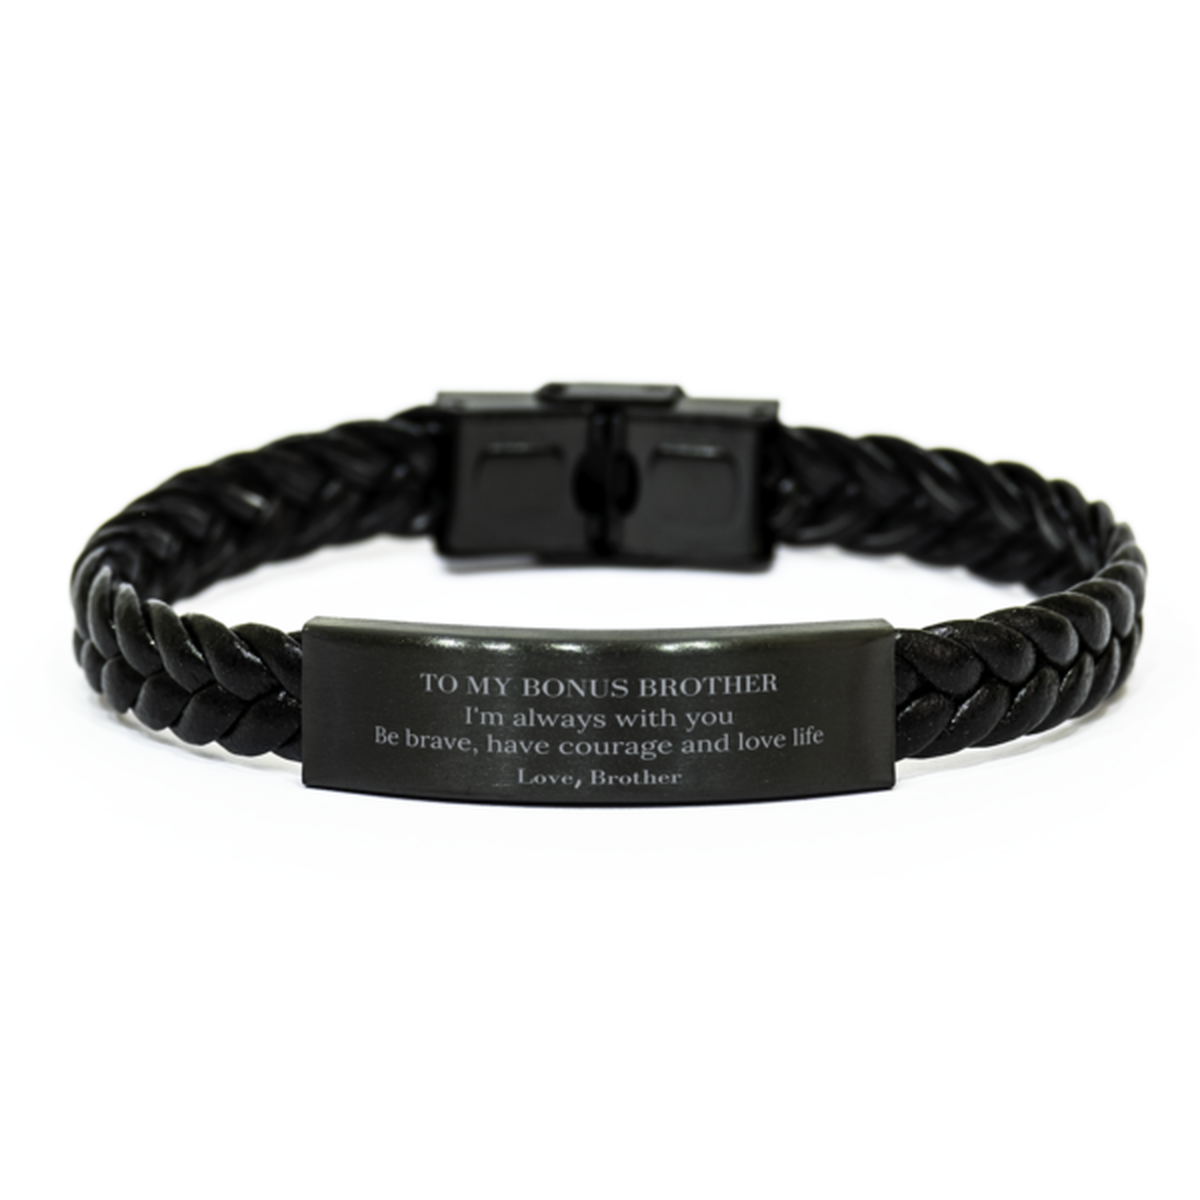 To My Bonus Brother Gifts from Brother, Unique Braided Leather Bracelet Inspirational Christmas Birthday Graduation Gifts for Bonus Brother I'm always with you. Be brave, have courage and love life. Love, Brother